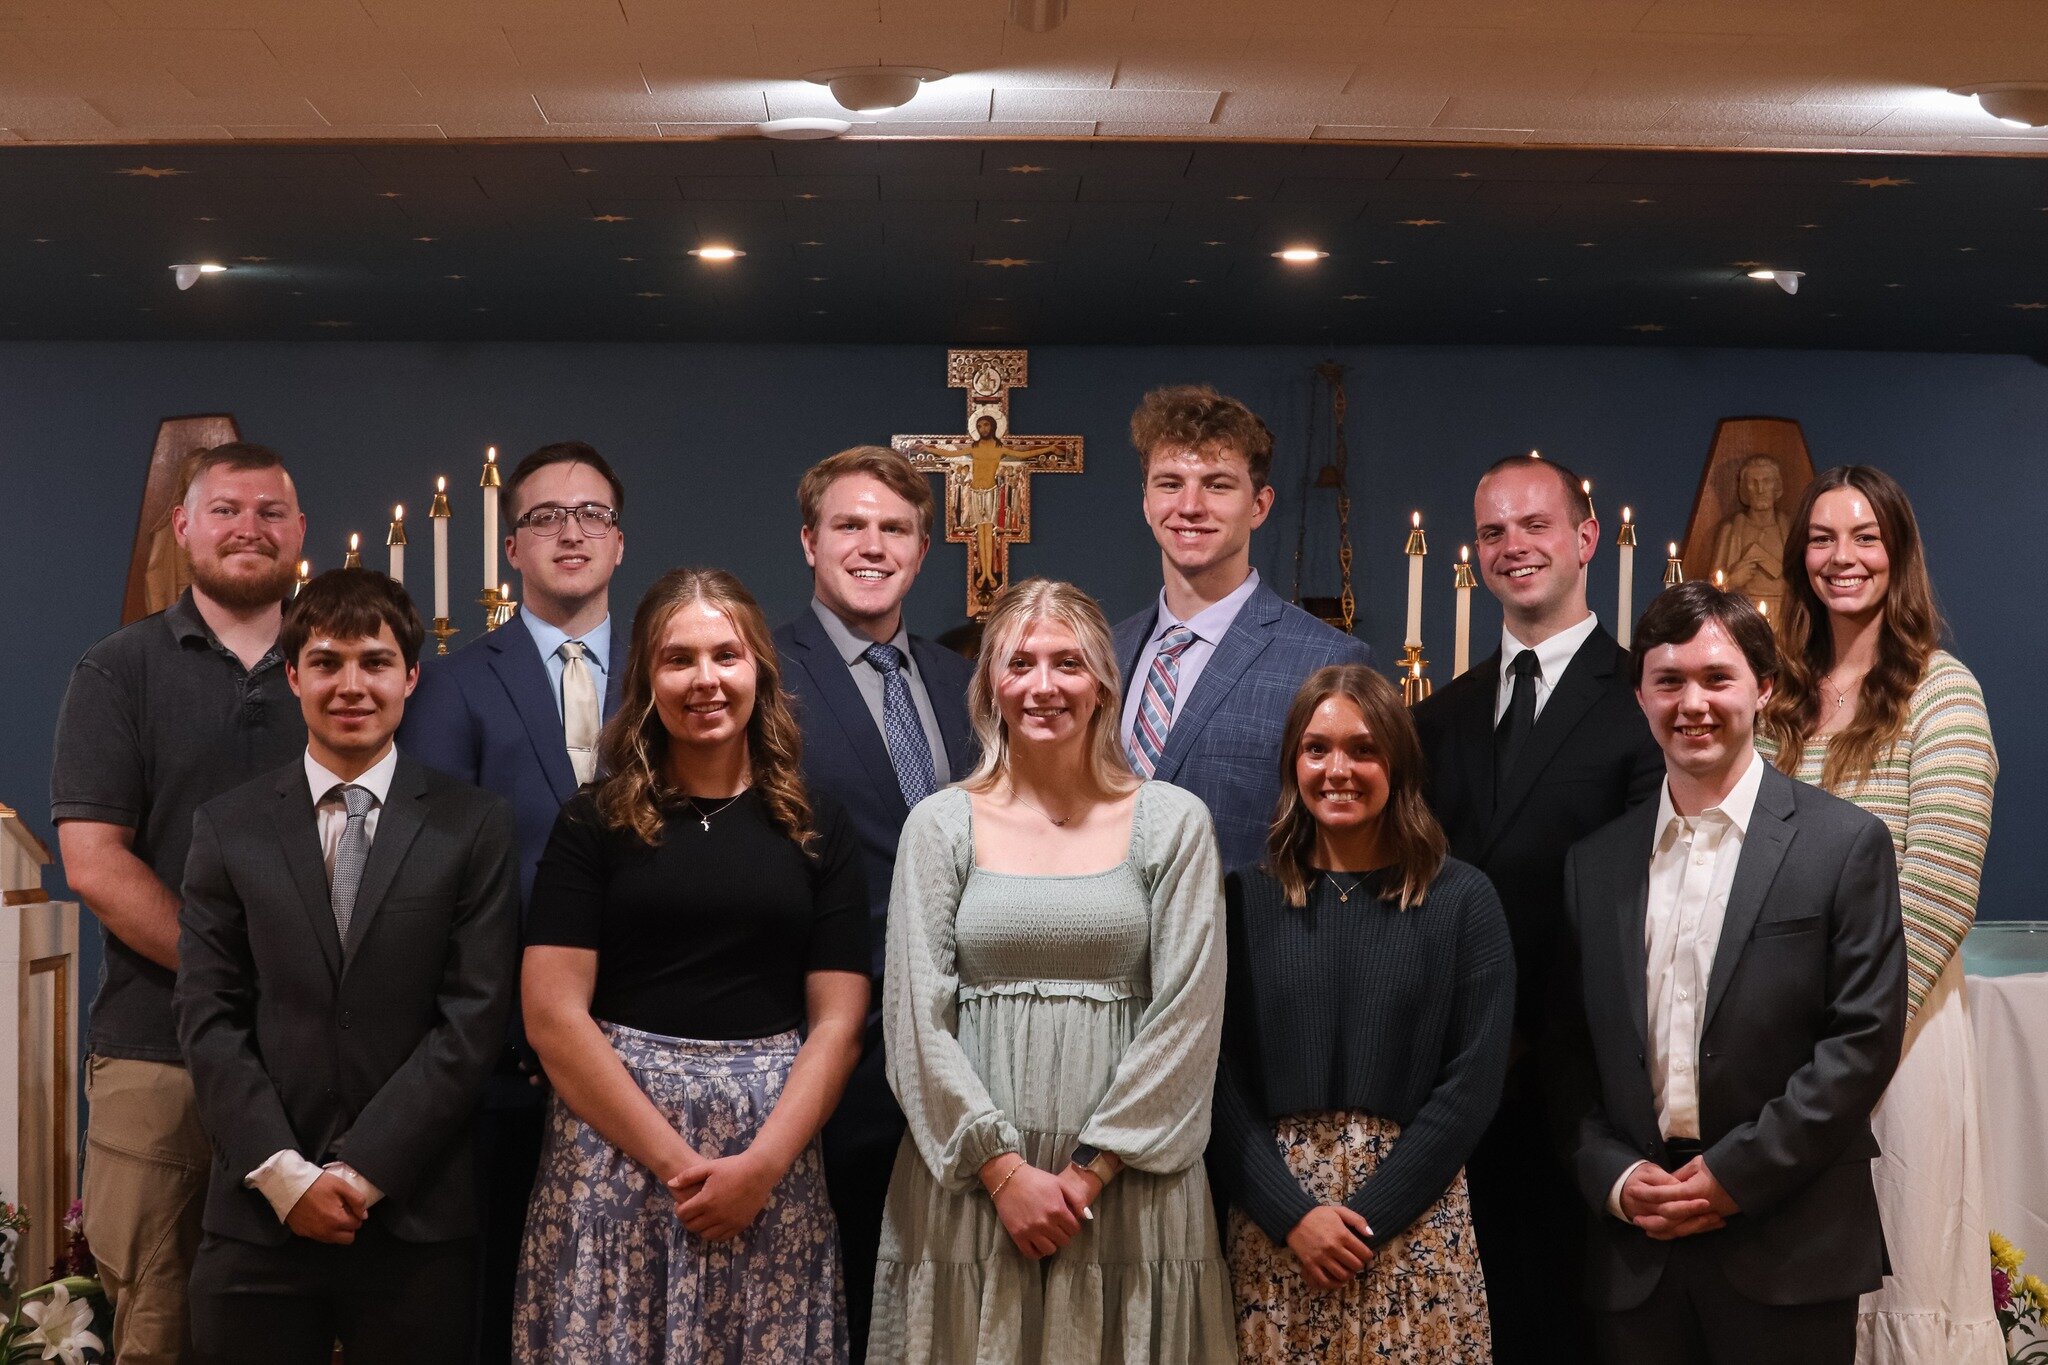 He is Risen, as He said He would!

This Saturday, at the Easter Vigil, we had the great joy of welcoming 11 people into the One, Holy, Catholic, and Apostolic Church! 

Welcome home (front l-r) Connor, Skyler, Charlotte, Madison, Jacob, (back l-r) Fl